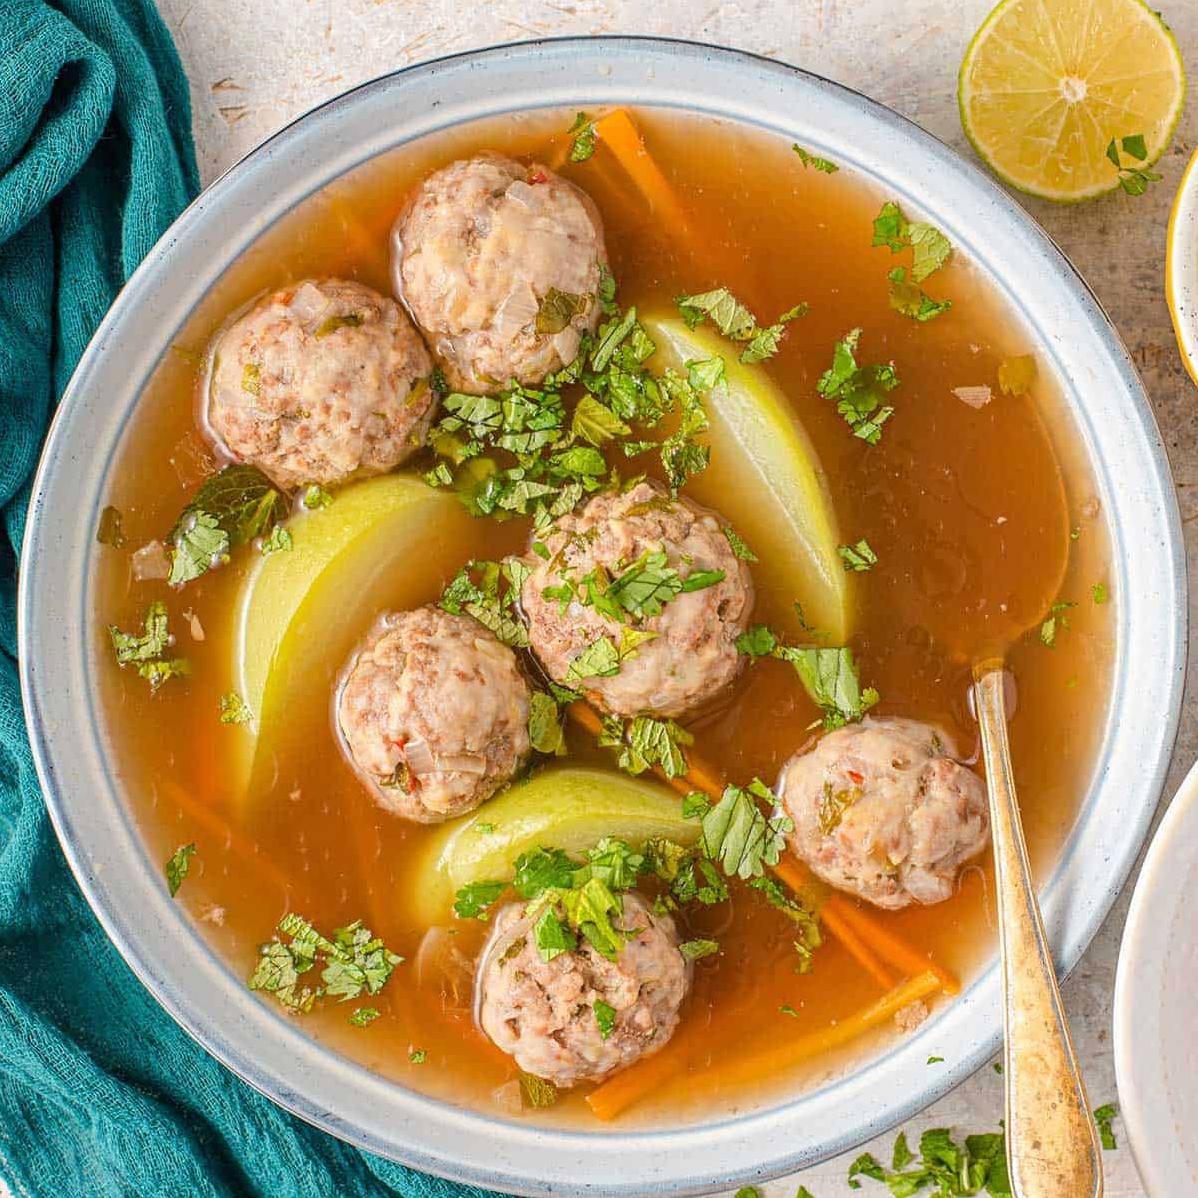 Satisfy Your Cravings with Our Hearty Meatball Soup Recipe!